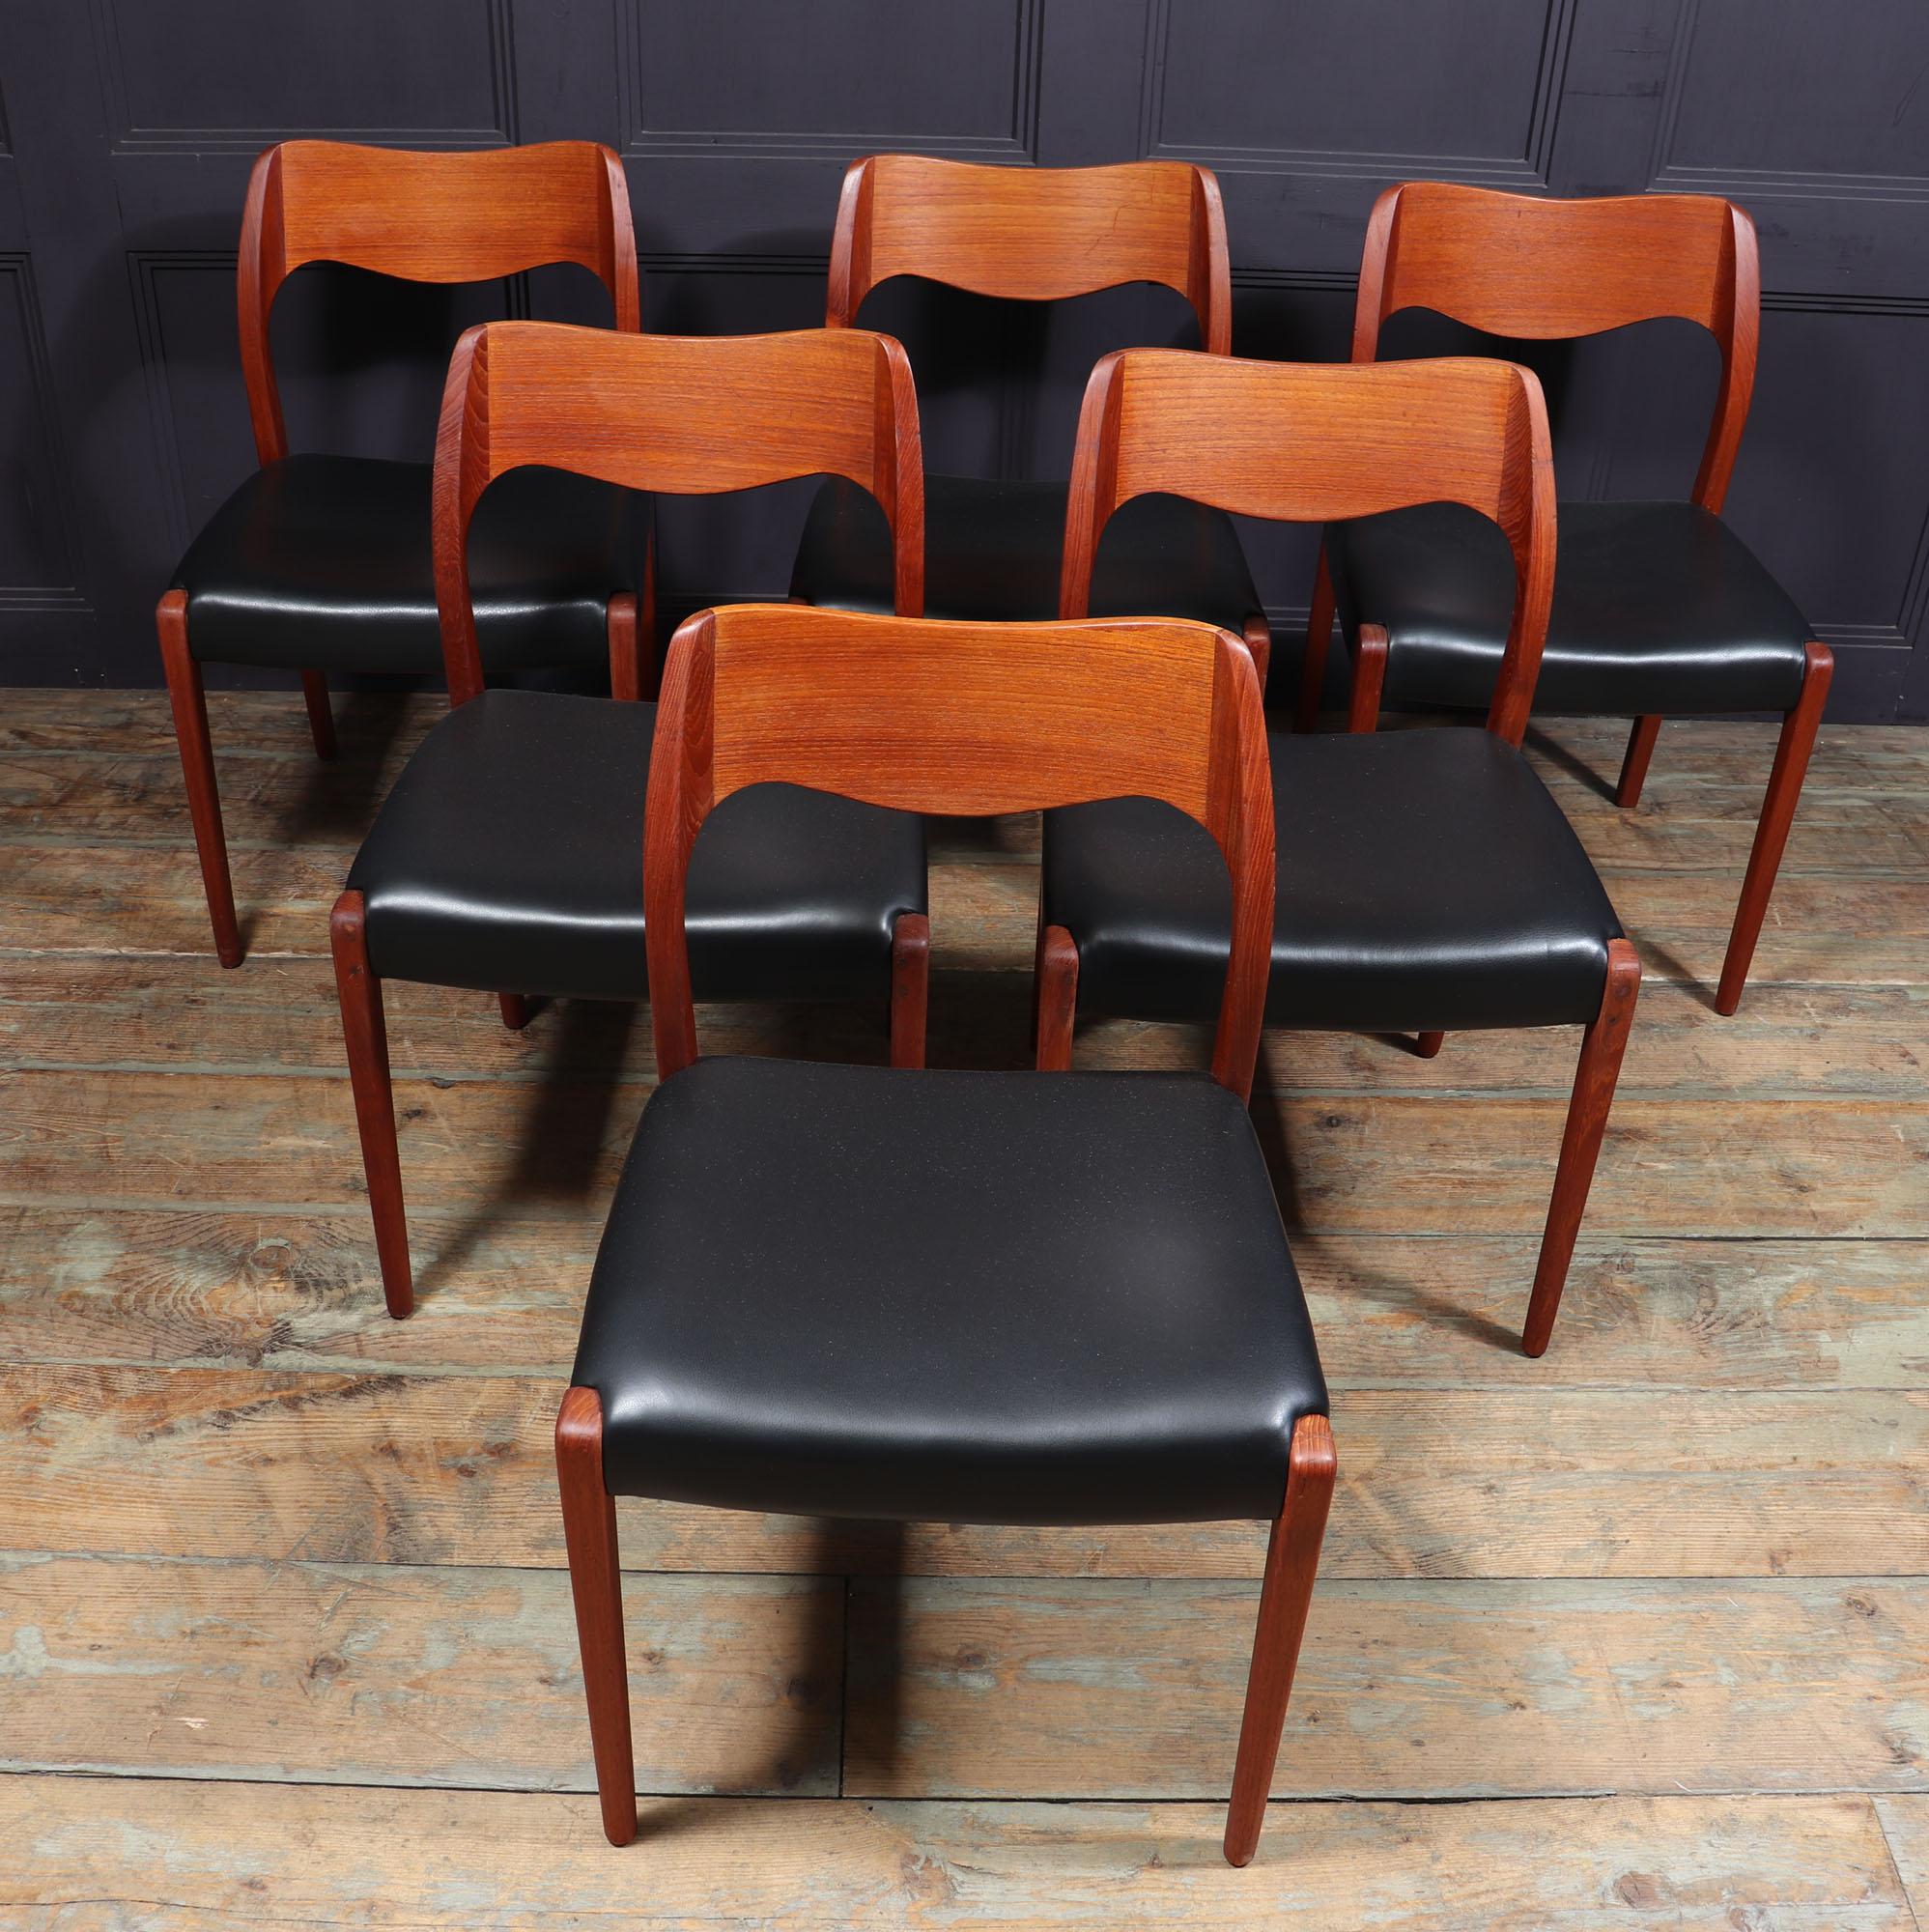 Moller dining chairs model 71
A set of six Teak model 71 dining chairs upholstered in leather. Originally made in Denmark in the 1960s, the chairs have great overall quality and are all solid with no loose joints. The frames have been polished